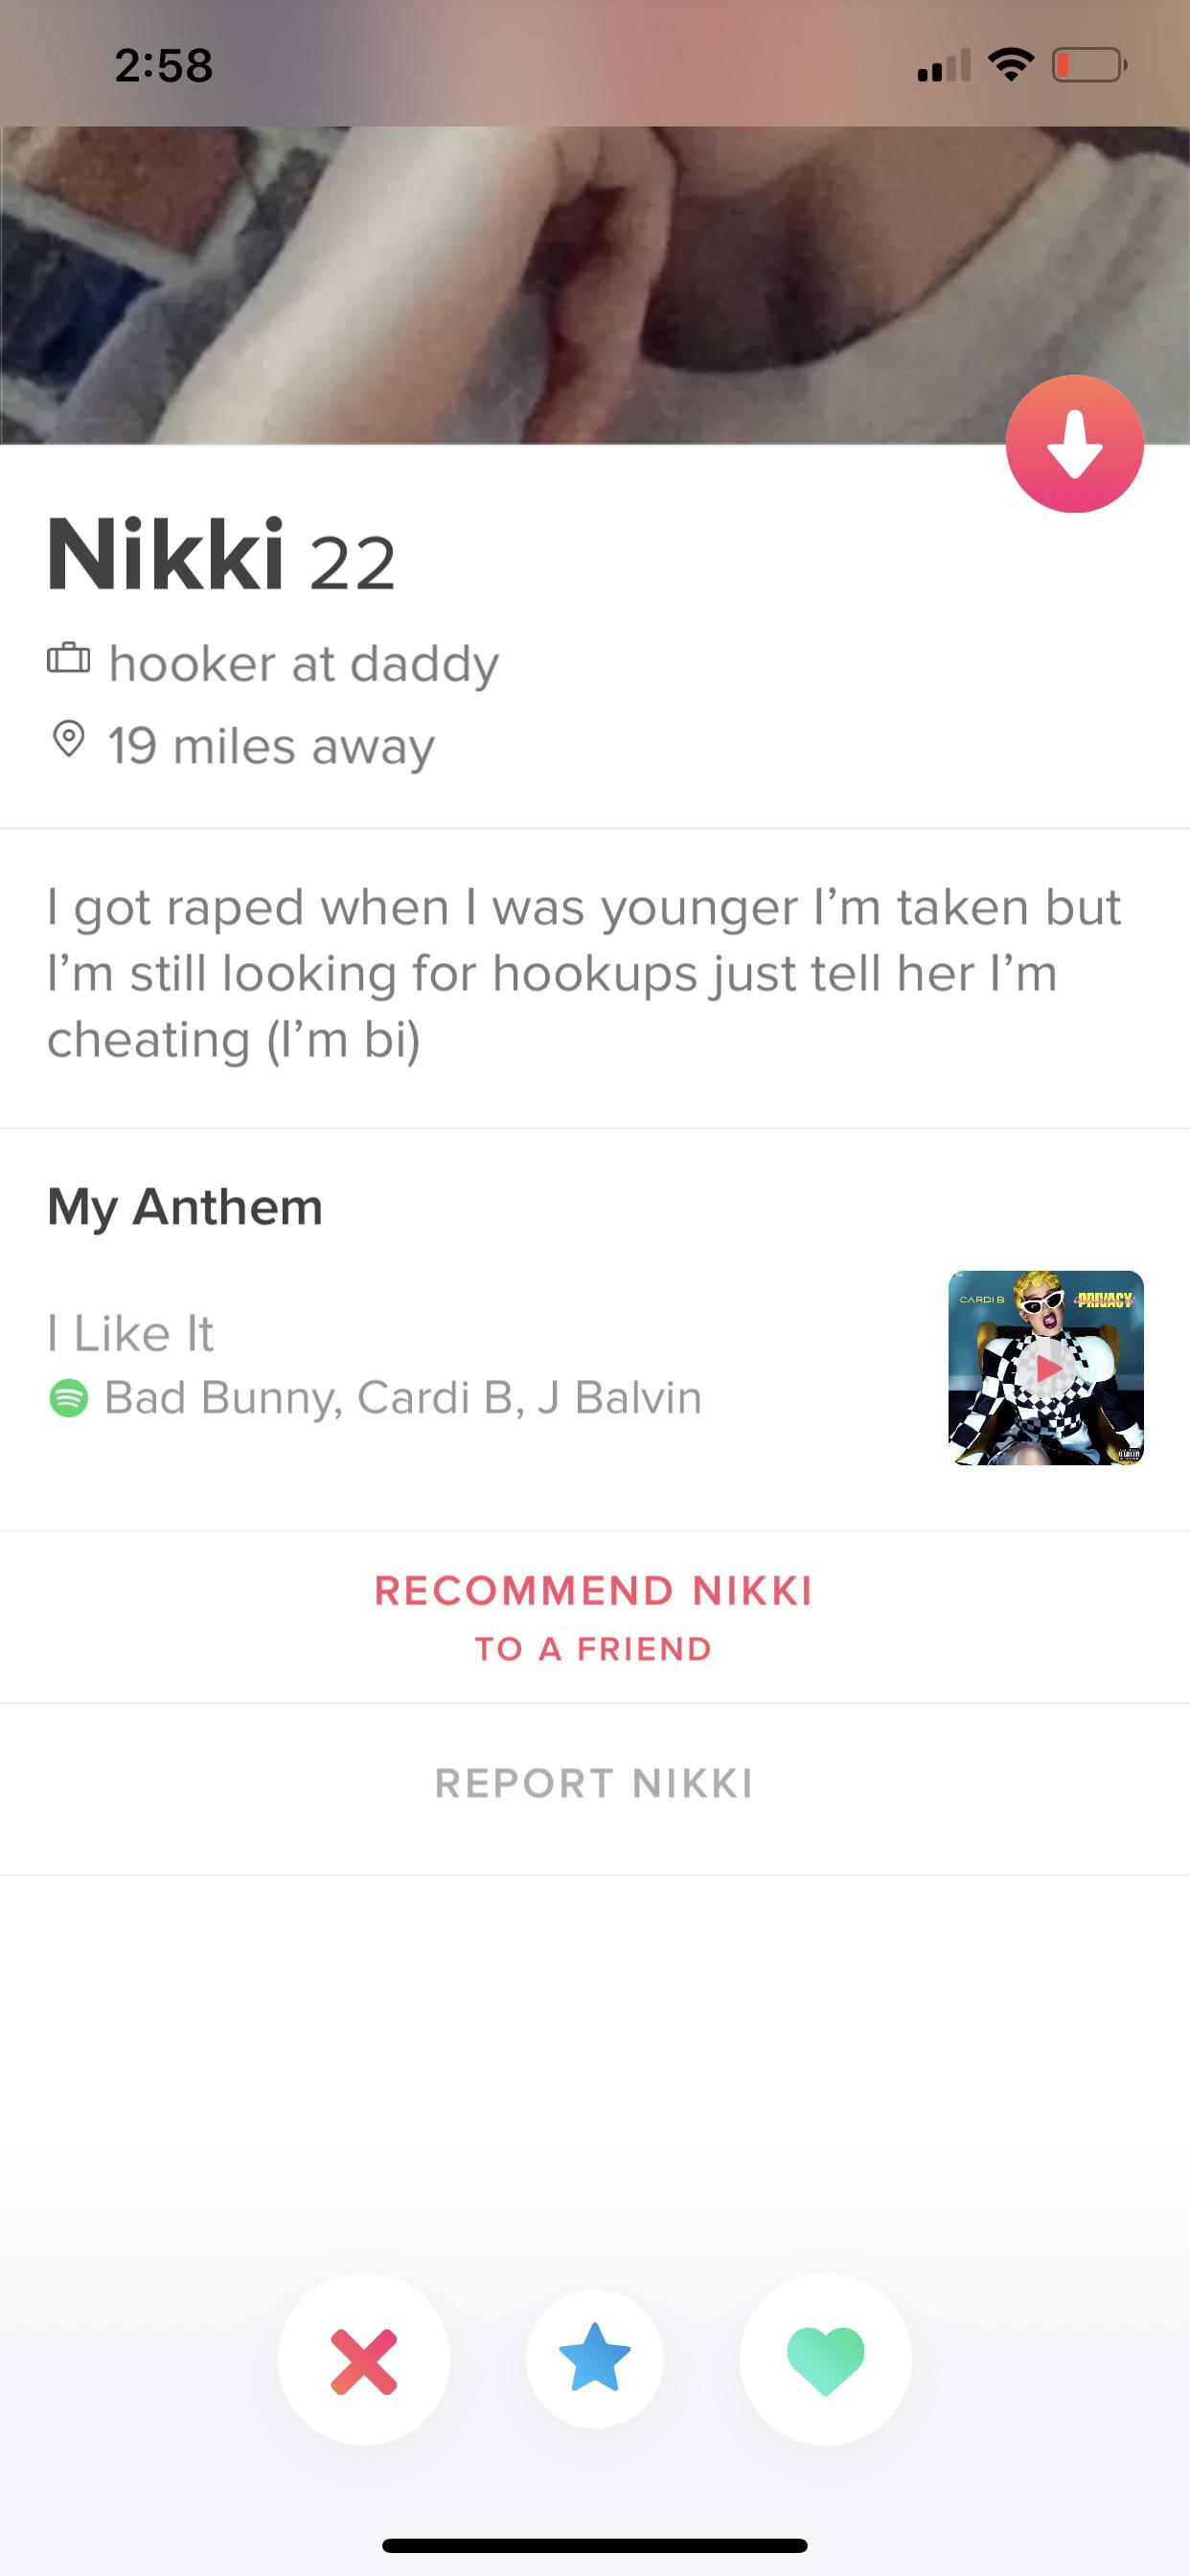 Funny tinder profile - website - Nikki 22 hooker at daddy 19 miles away I got raped when I was younger I'm taken but I'm still looking for hookups just tell her I'm cheating I'm bi My Anthem Cardib I It Bad Bunny, Cardi B, J Balvin Recommend Nikki To A Fr